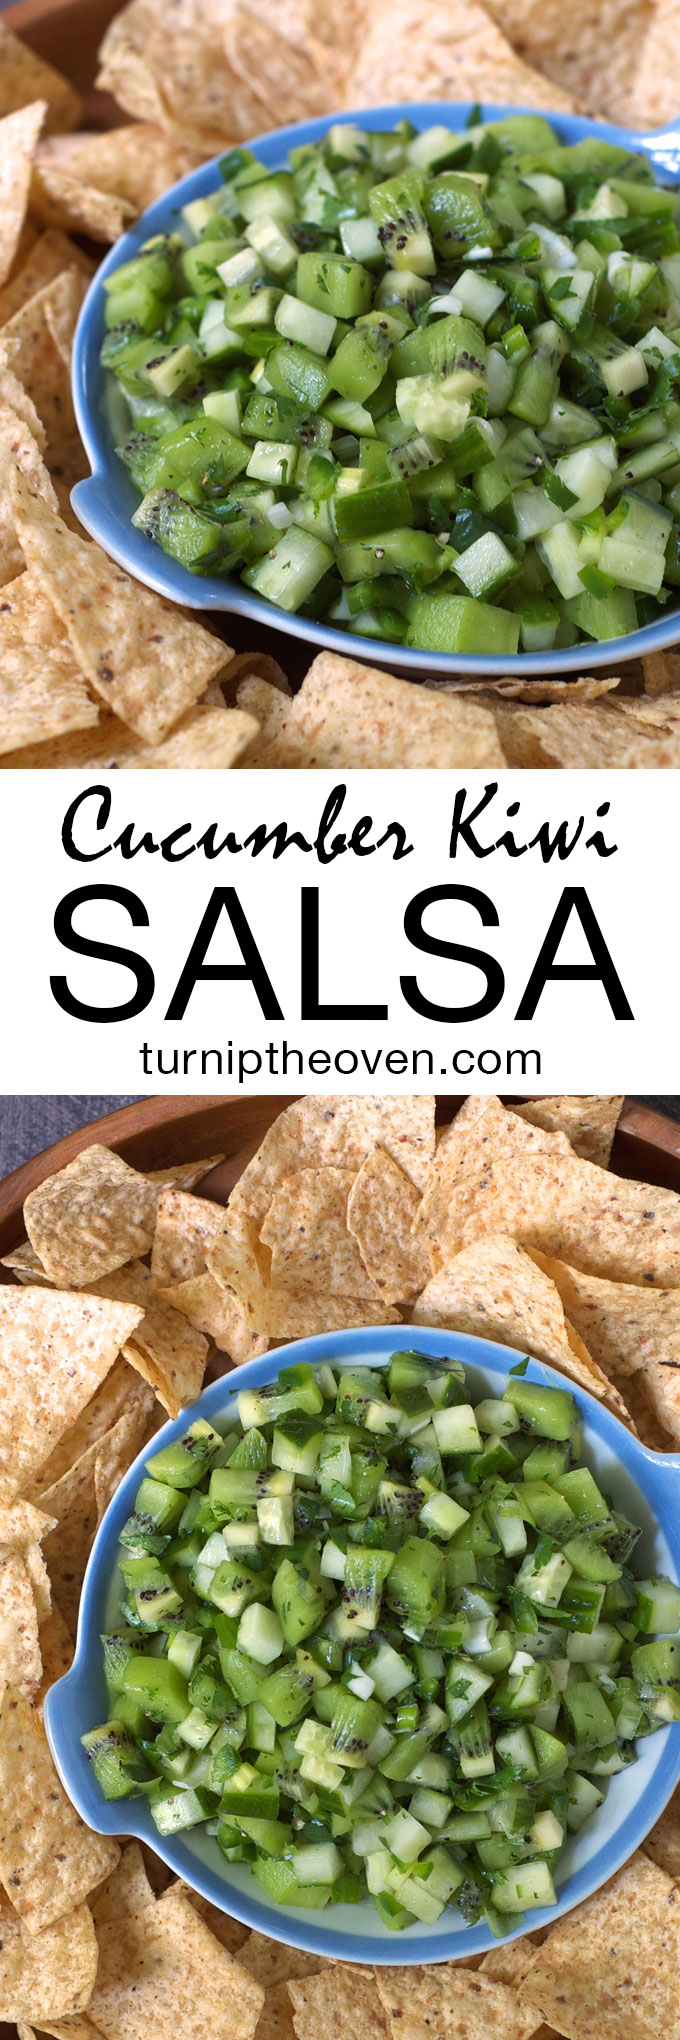 This crisp, refreshing salsa is bursting with the flavors of juicy kiwi, cool cucumber, tart lime, and spicy jalapeño. Try it with chips or as a topping for grilled chicken or fish.